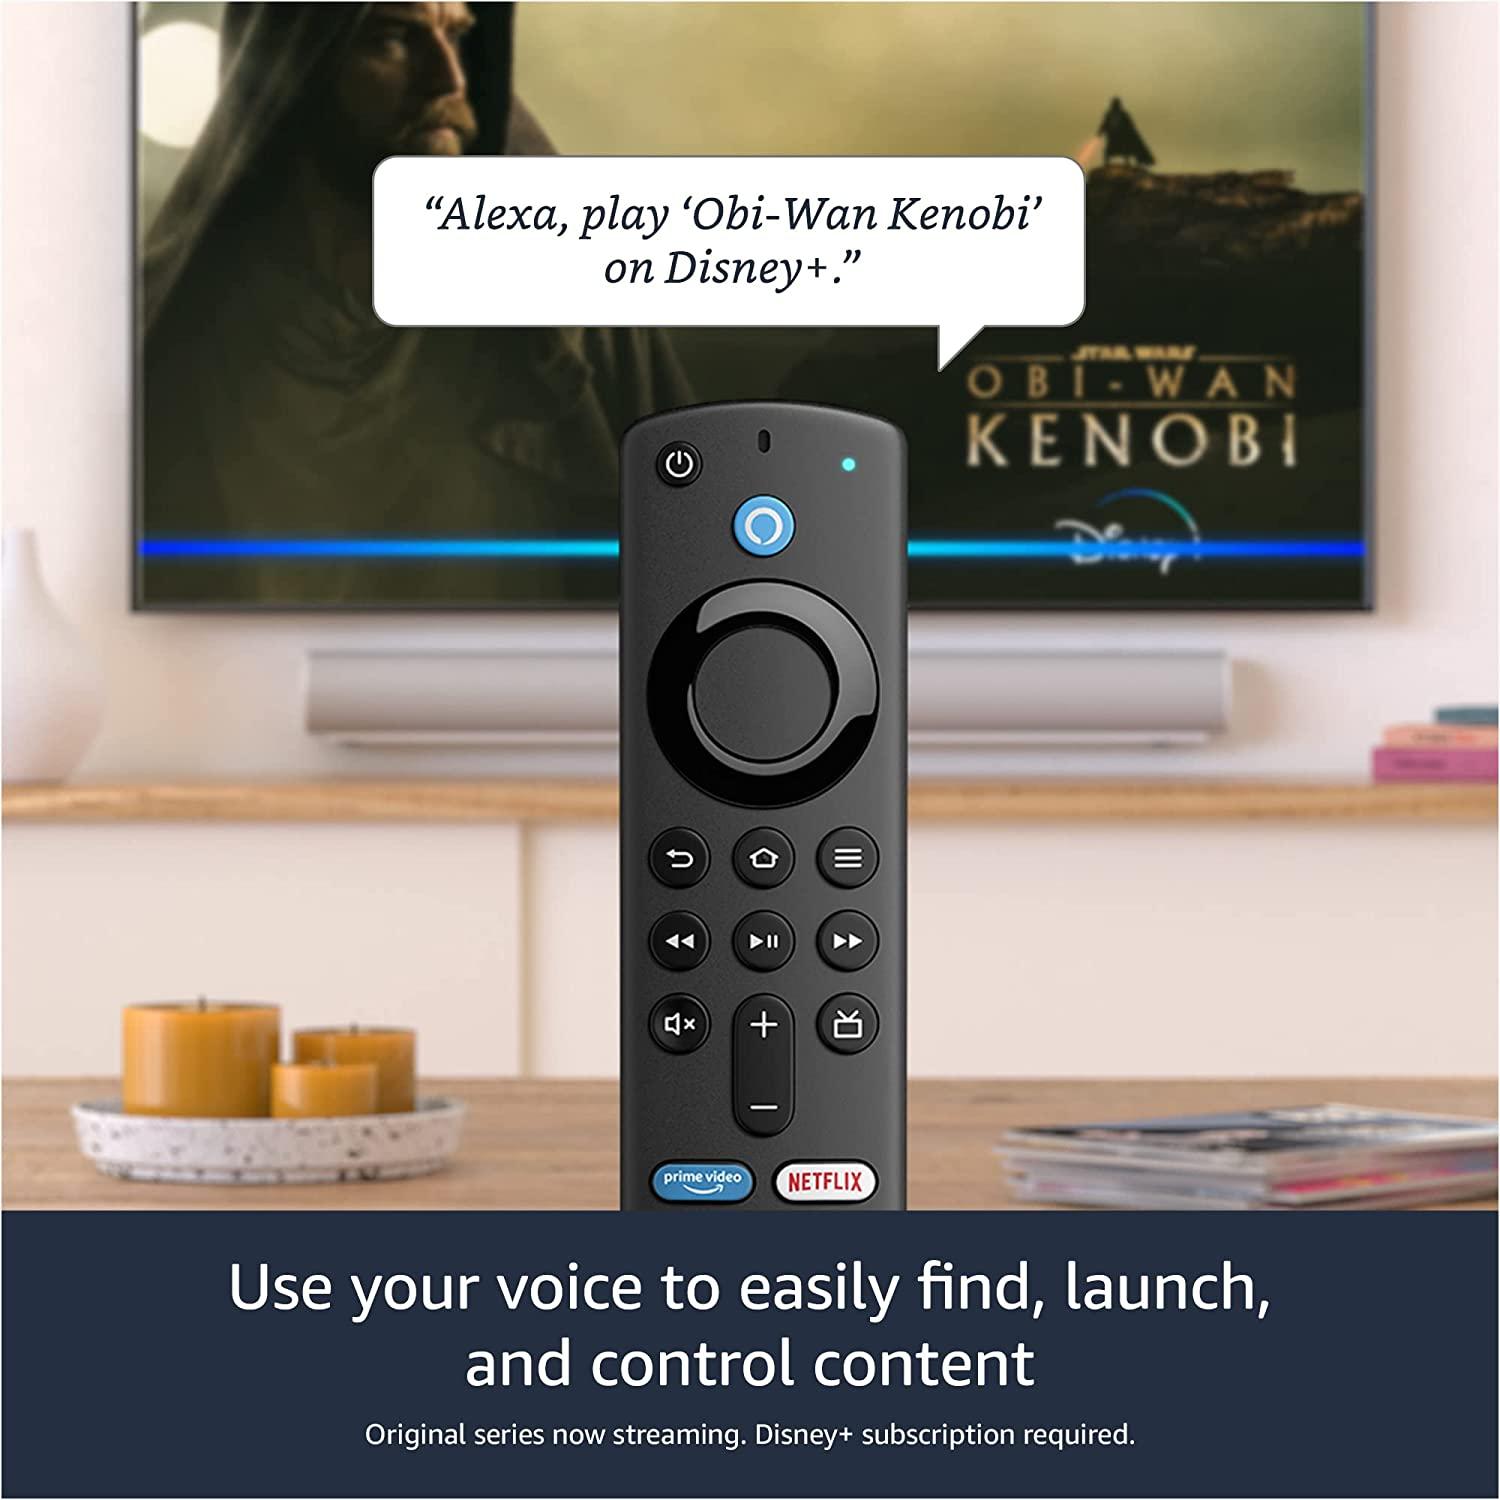 Fire TV Stick 4K streaming device with latest Alexa Voice